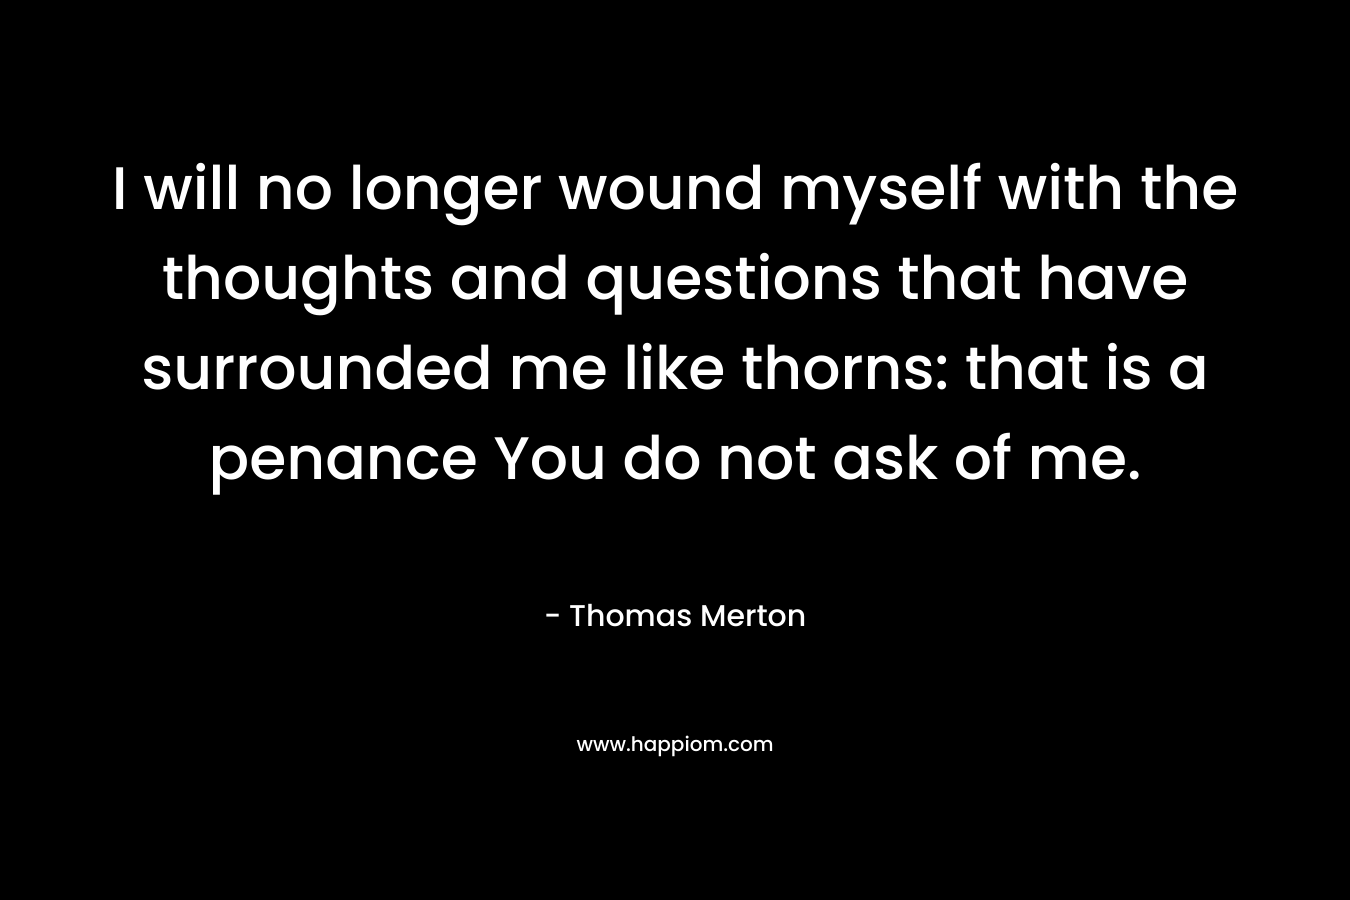 I will no longer wound myself with the thoughts and questions that have surrounded me like thorns: that is a penance You do not ask of me.